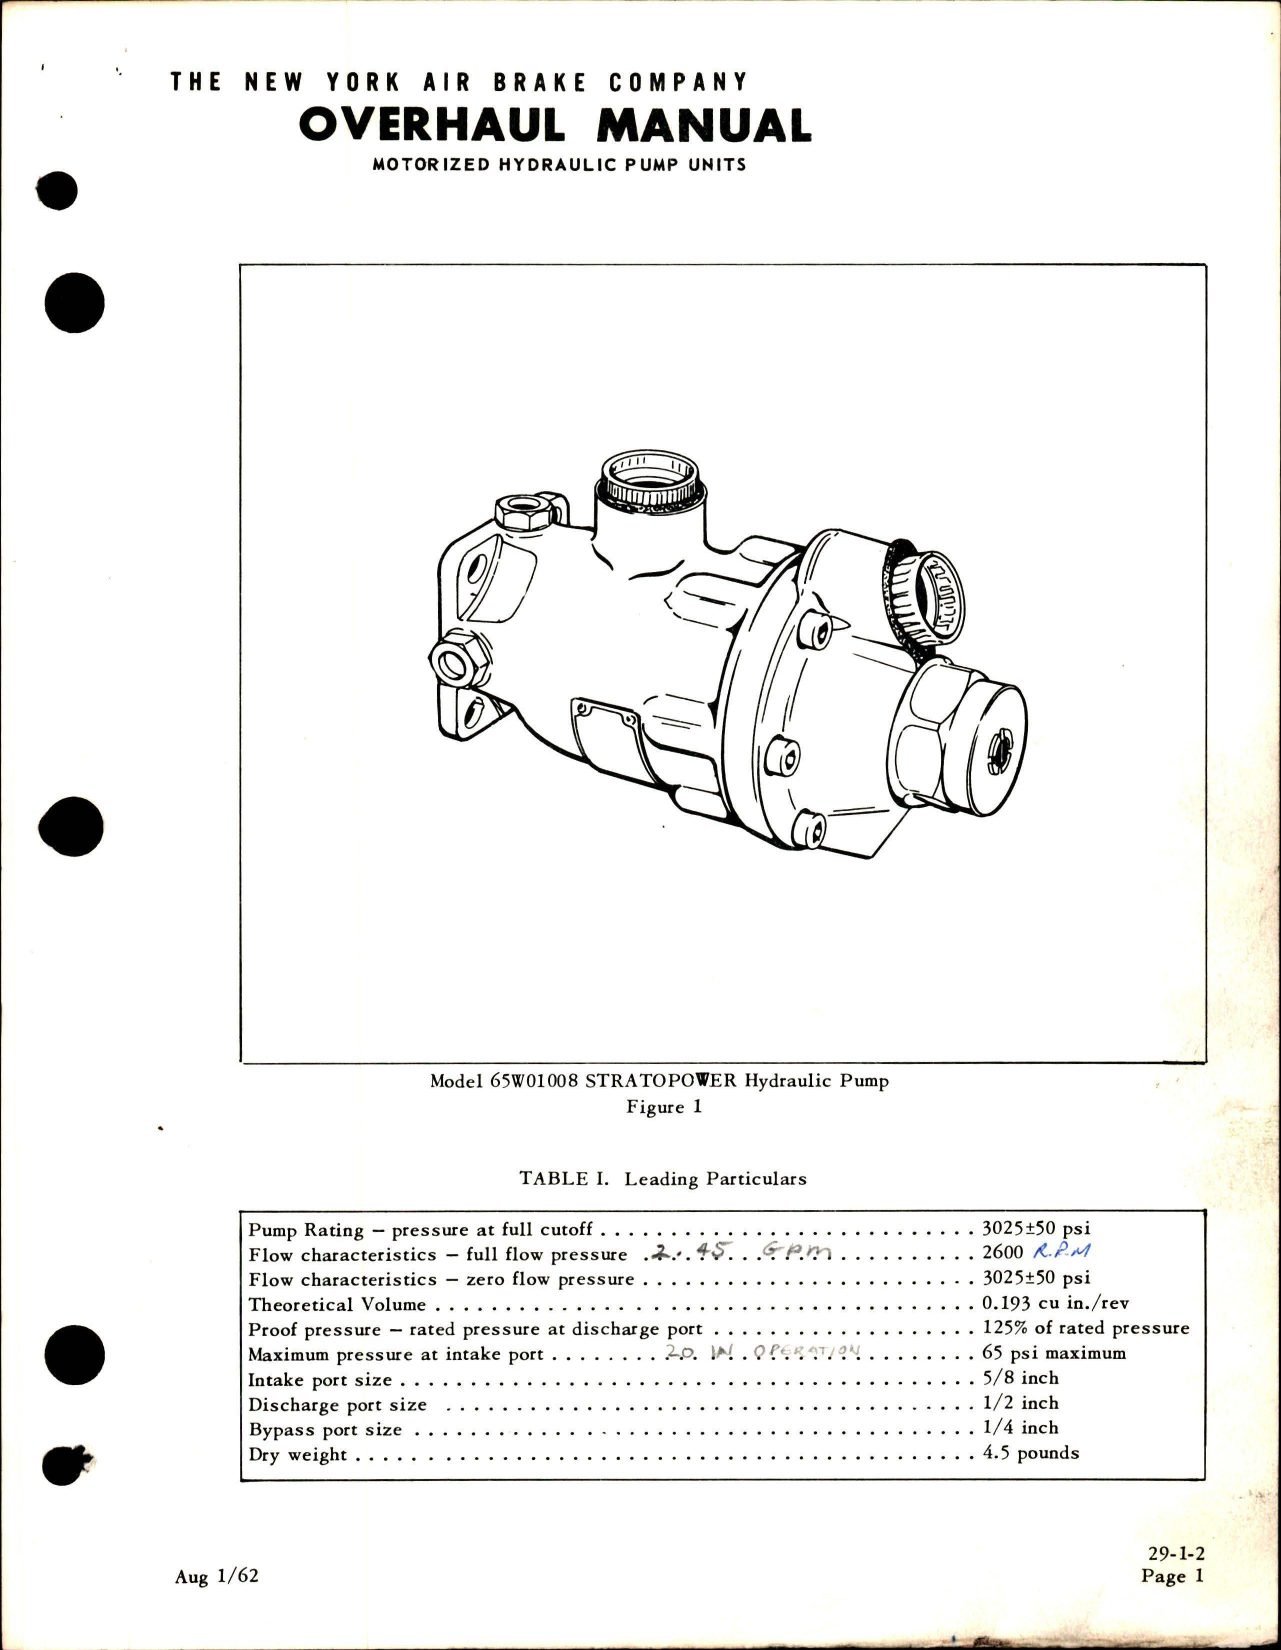 Sample page 9 from AirCorps Library document: Overhaul Manual for Stratopower Motorized Hydraulic Pumps - Models 165W01003-3 and 165W01007-2 